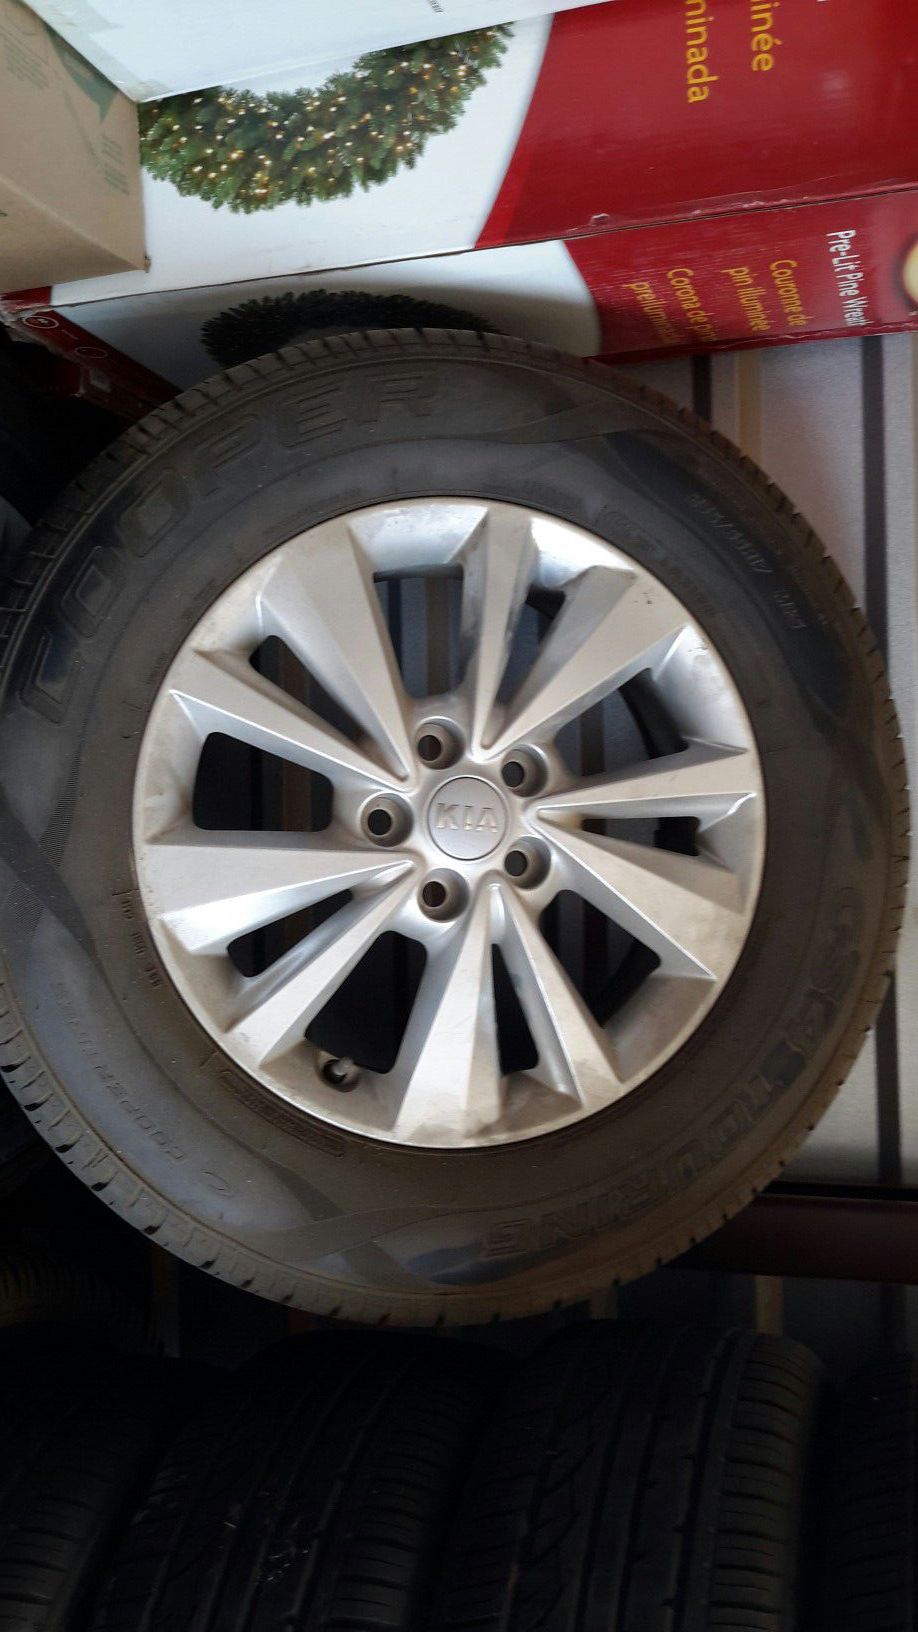 Kia SodonaTires and Rims set 4 Very Good Condition With Less Than 3 Month Use Mount And Balance Ready To Go.